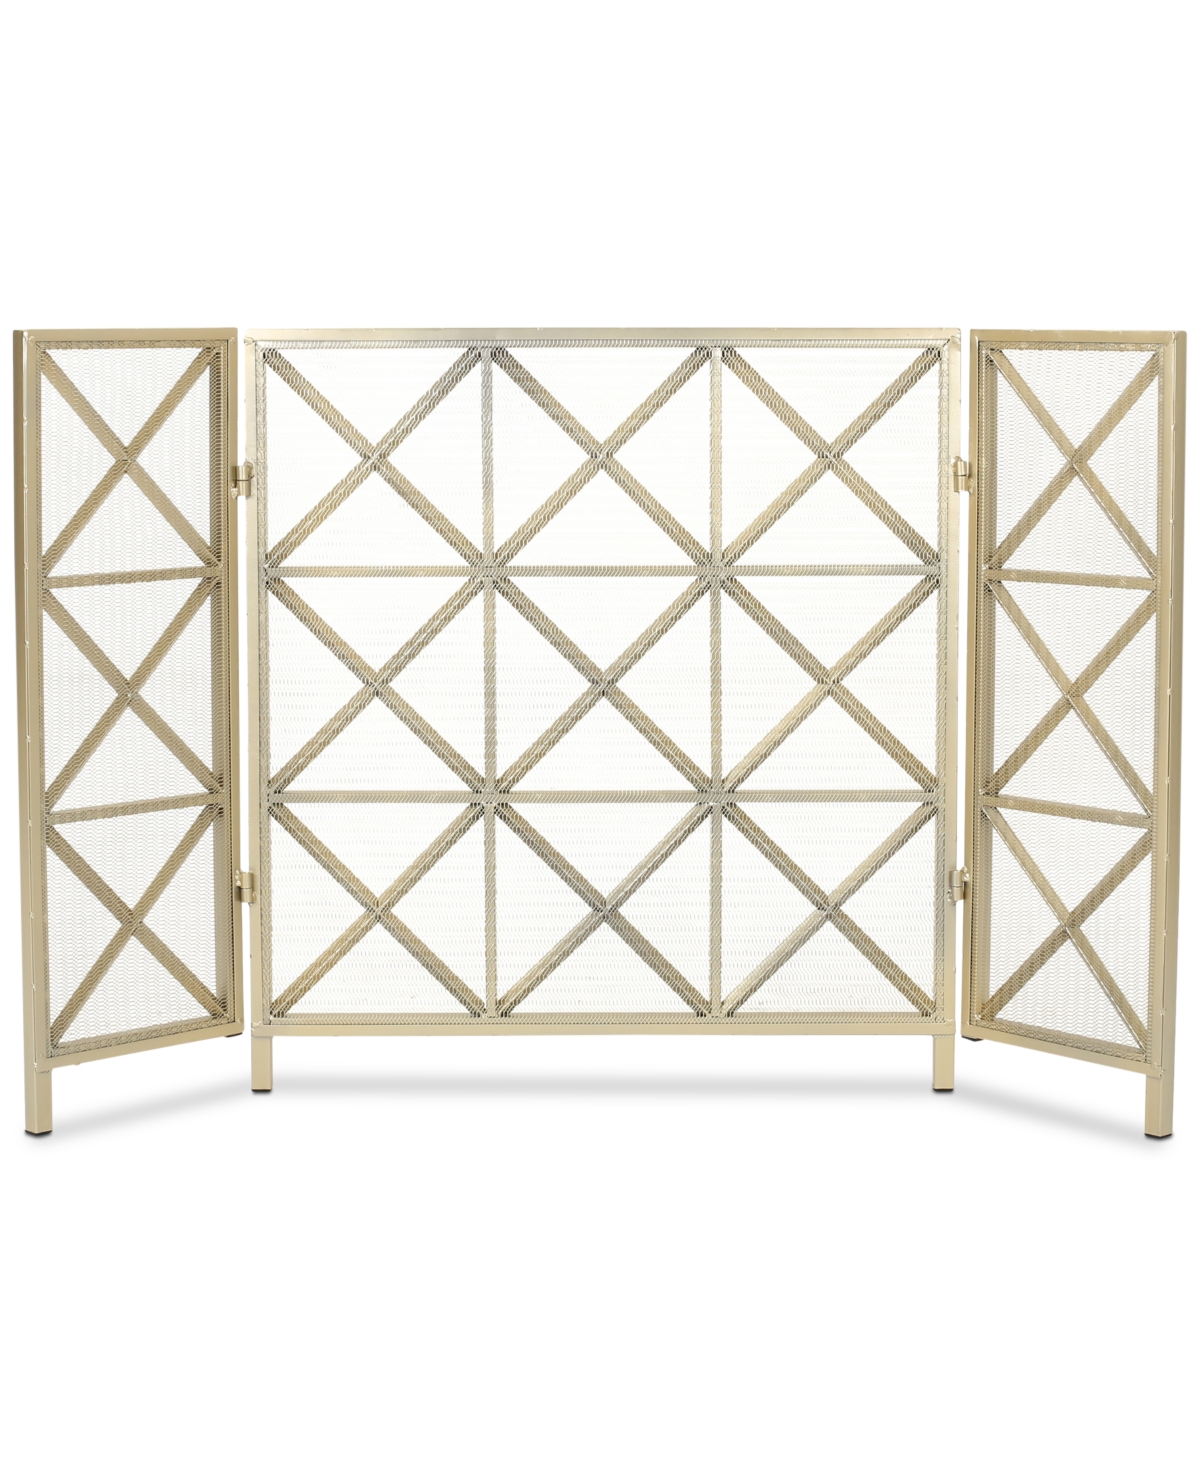 Noble House Three Panel Fireplace Screen In Gold